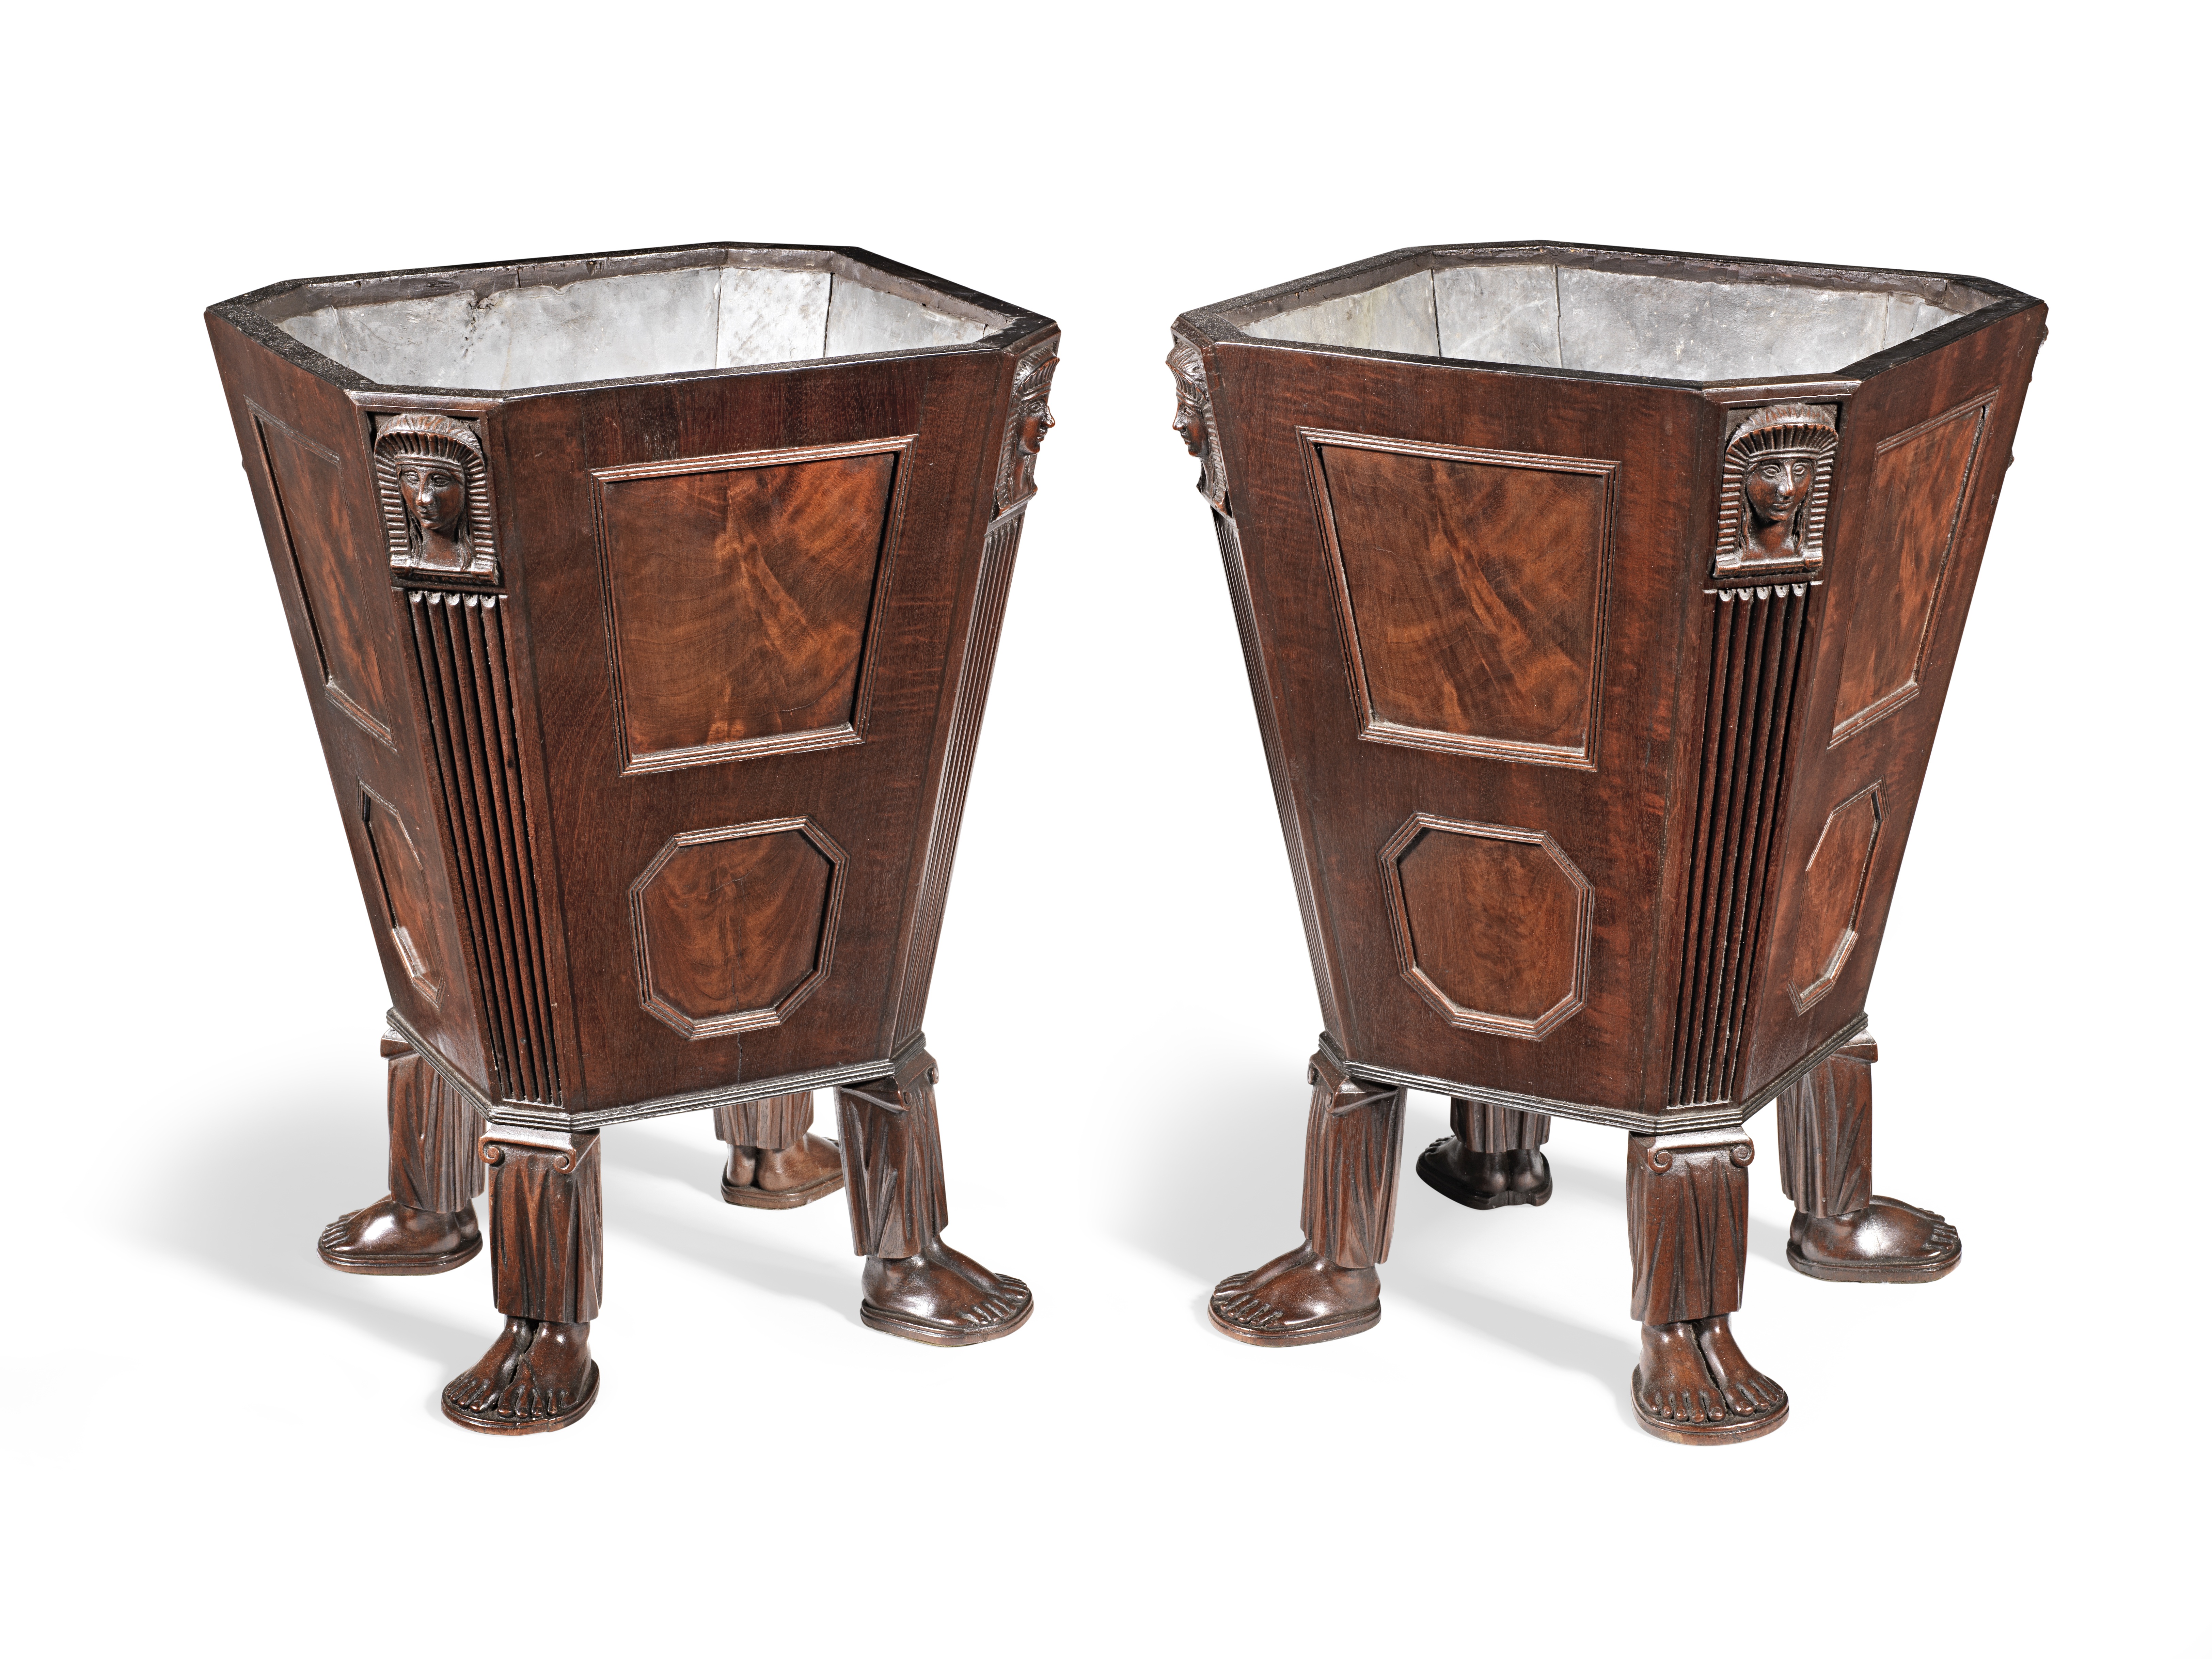 A pair of Regency 'Egyptian revival' mahogany and ebonised line-inlaid wine coolers (2)